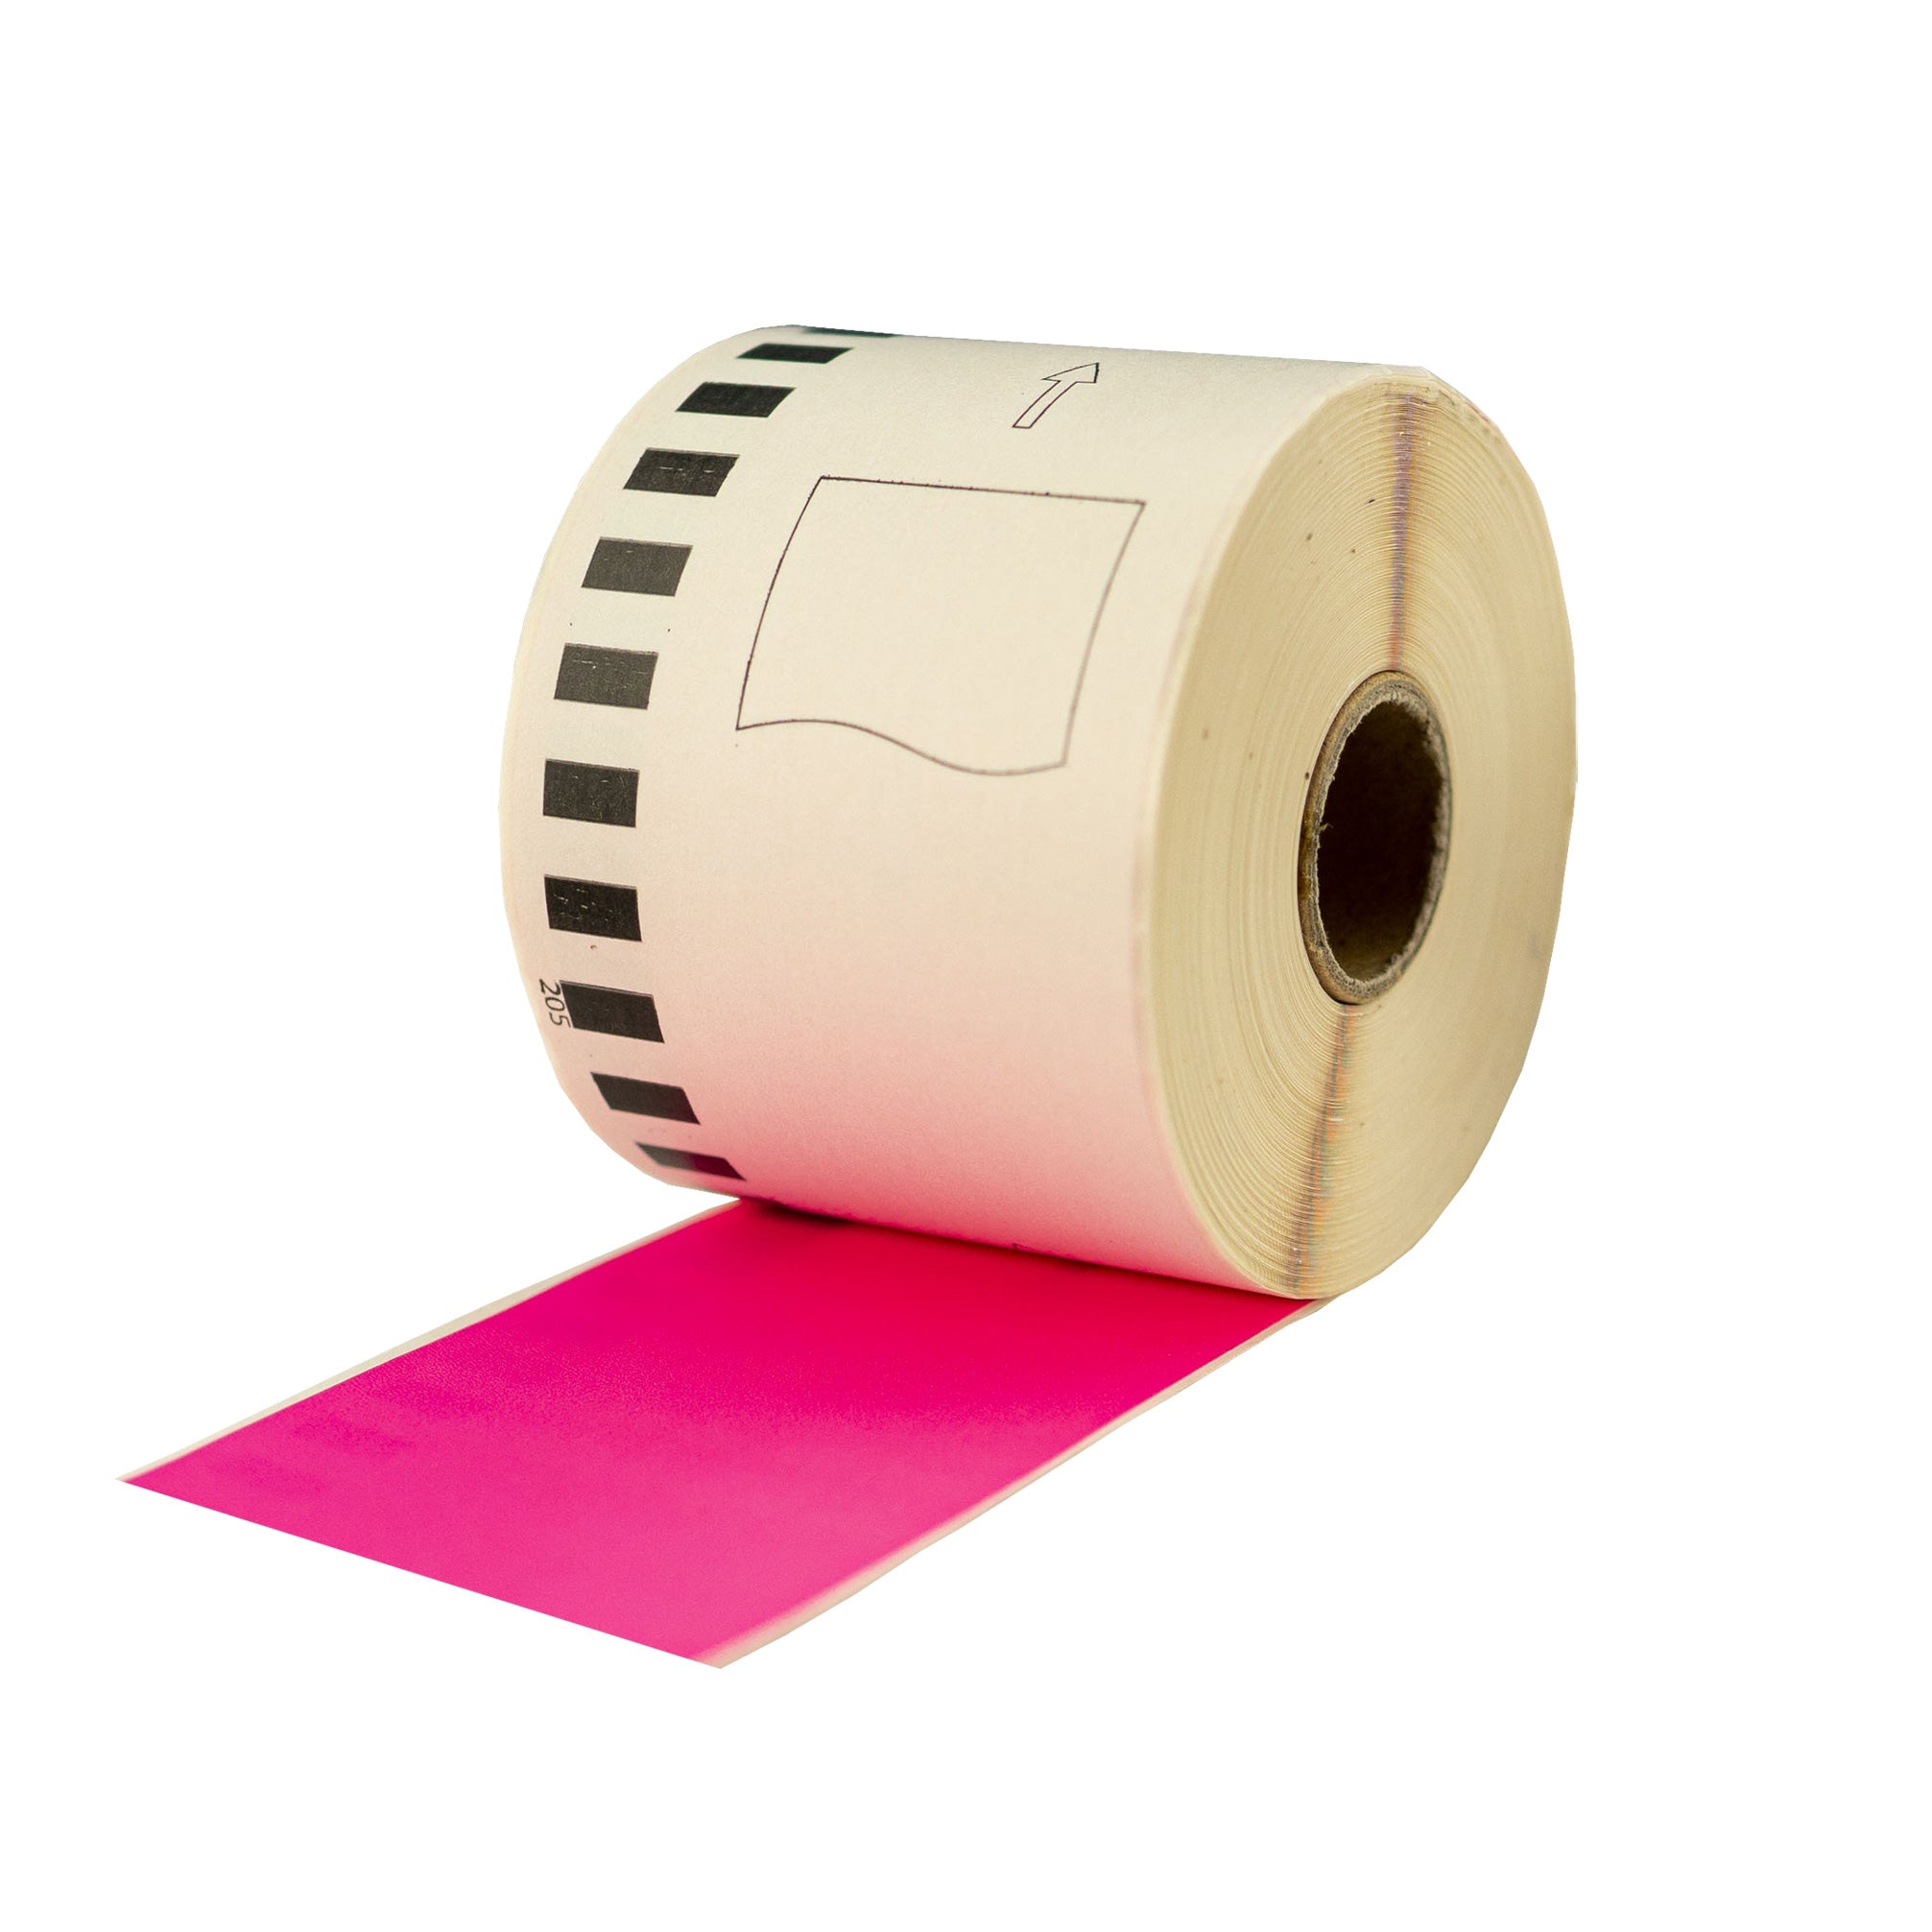 Compatible Brother DK-11202 Pink Refill Shipping Labels  62 X 100mm/ 50 Rolls